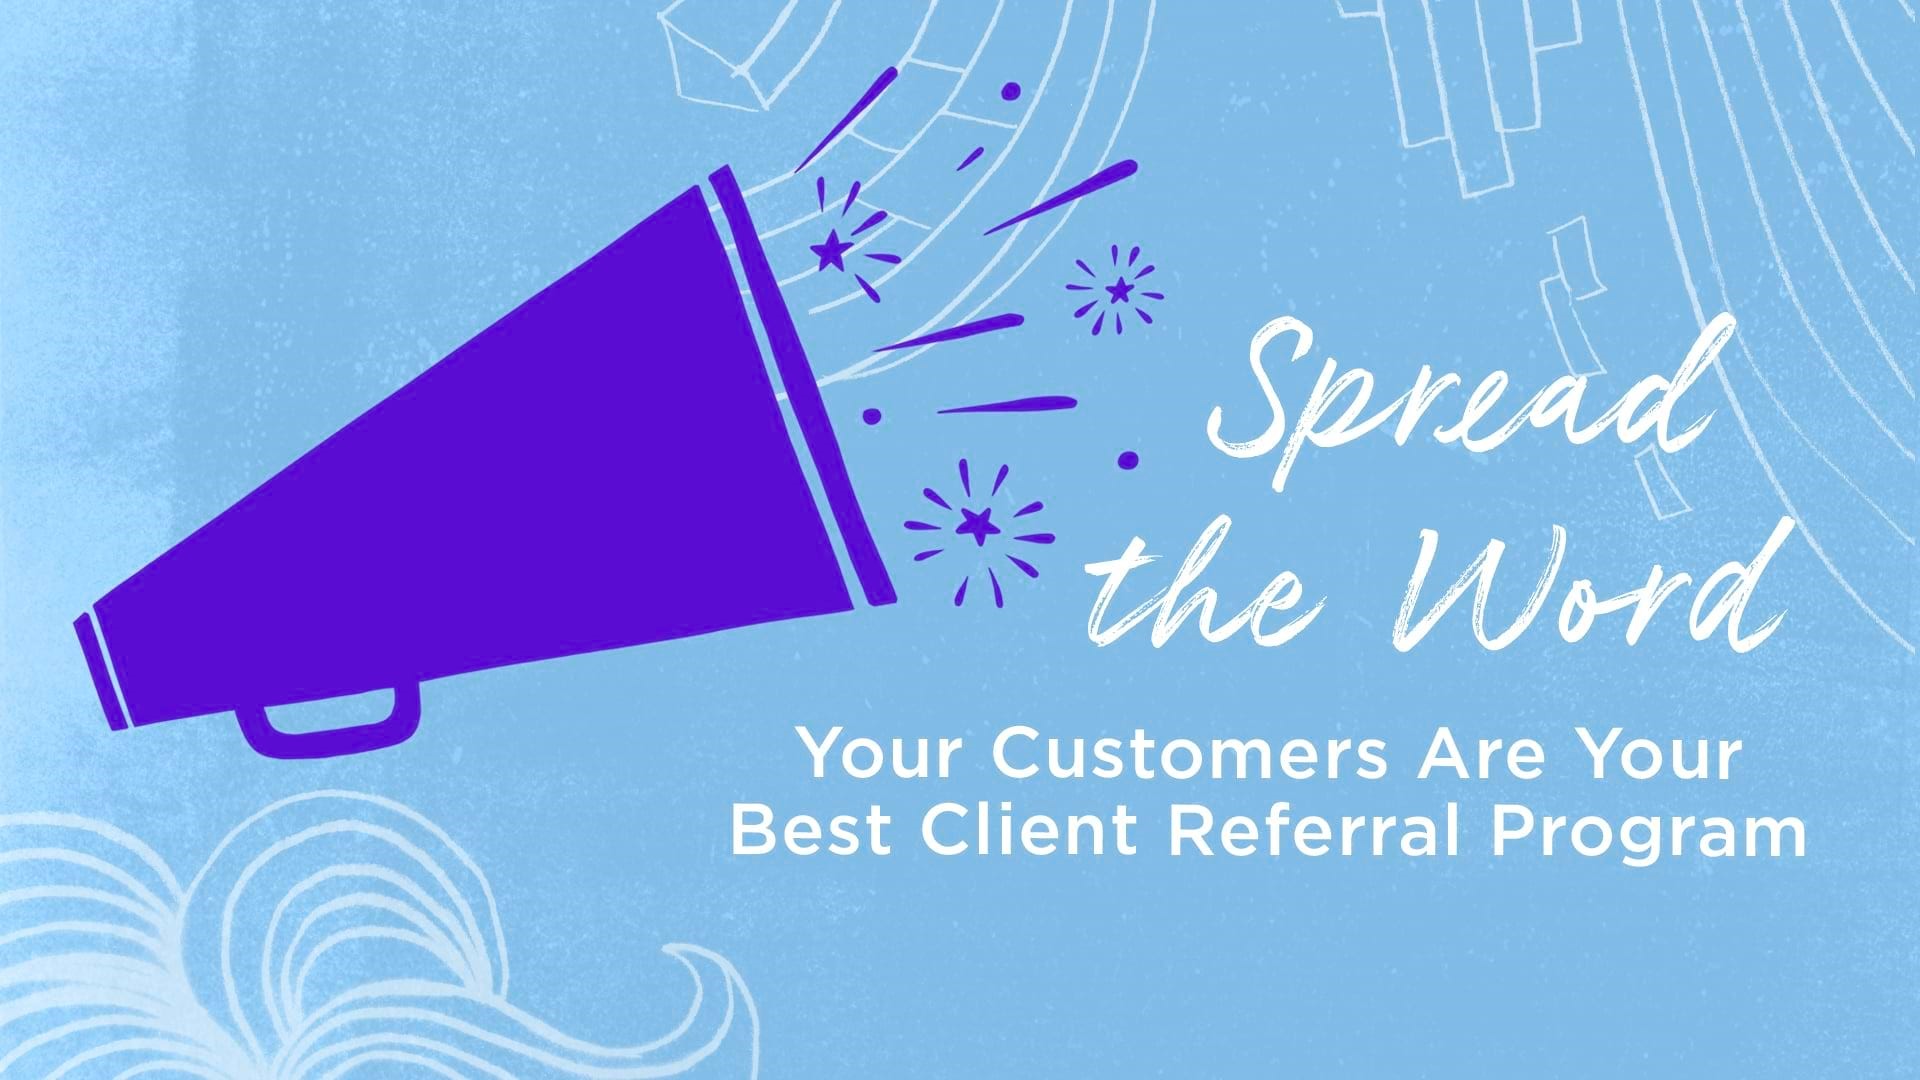 Customers are Your Best Client Referral Program ARTICLE HERO IMAGE